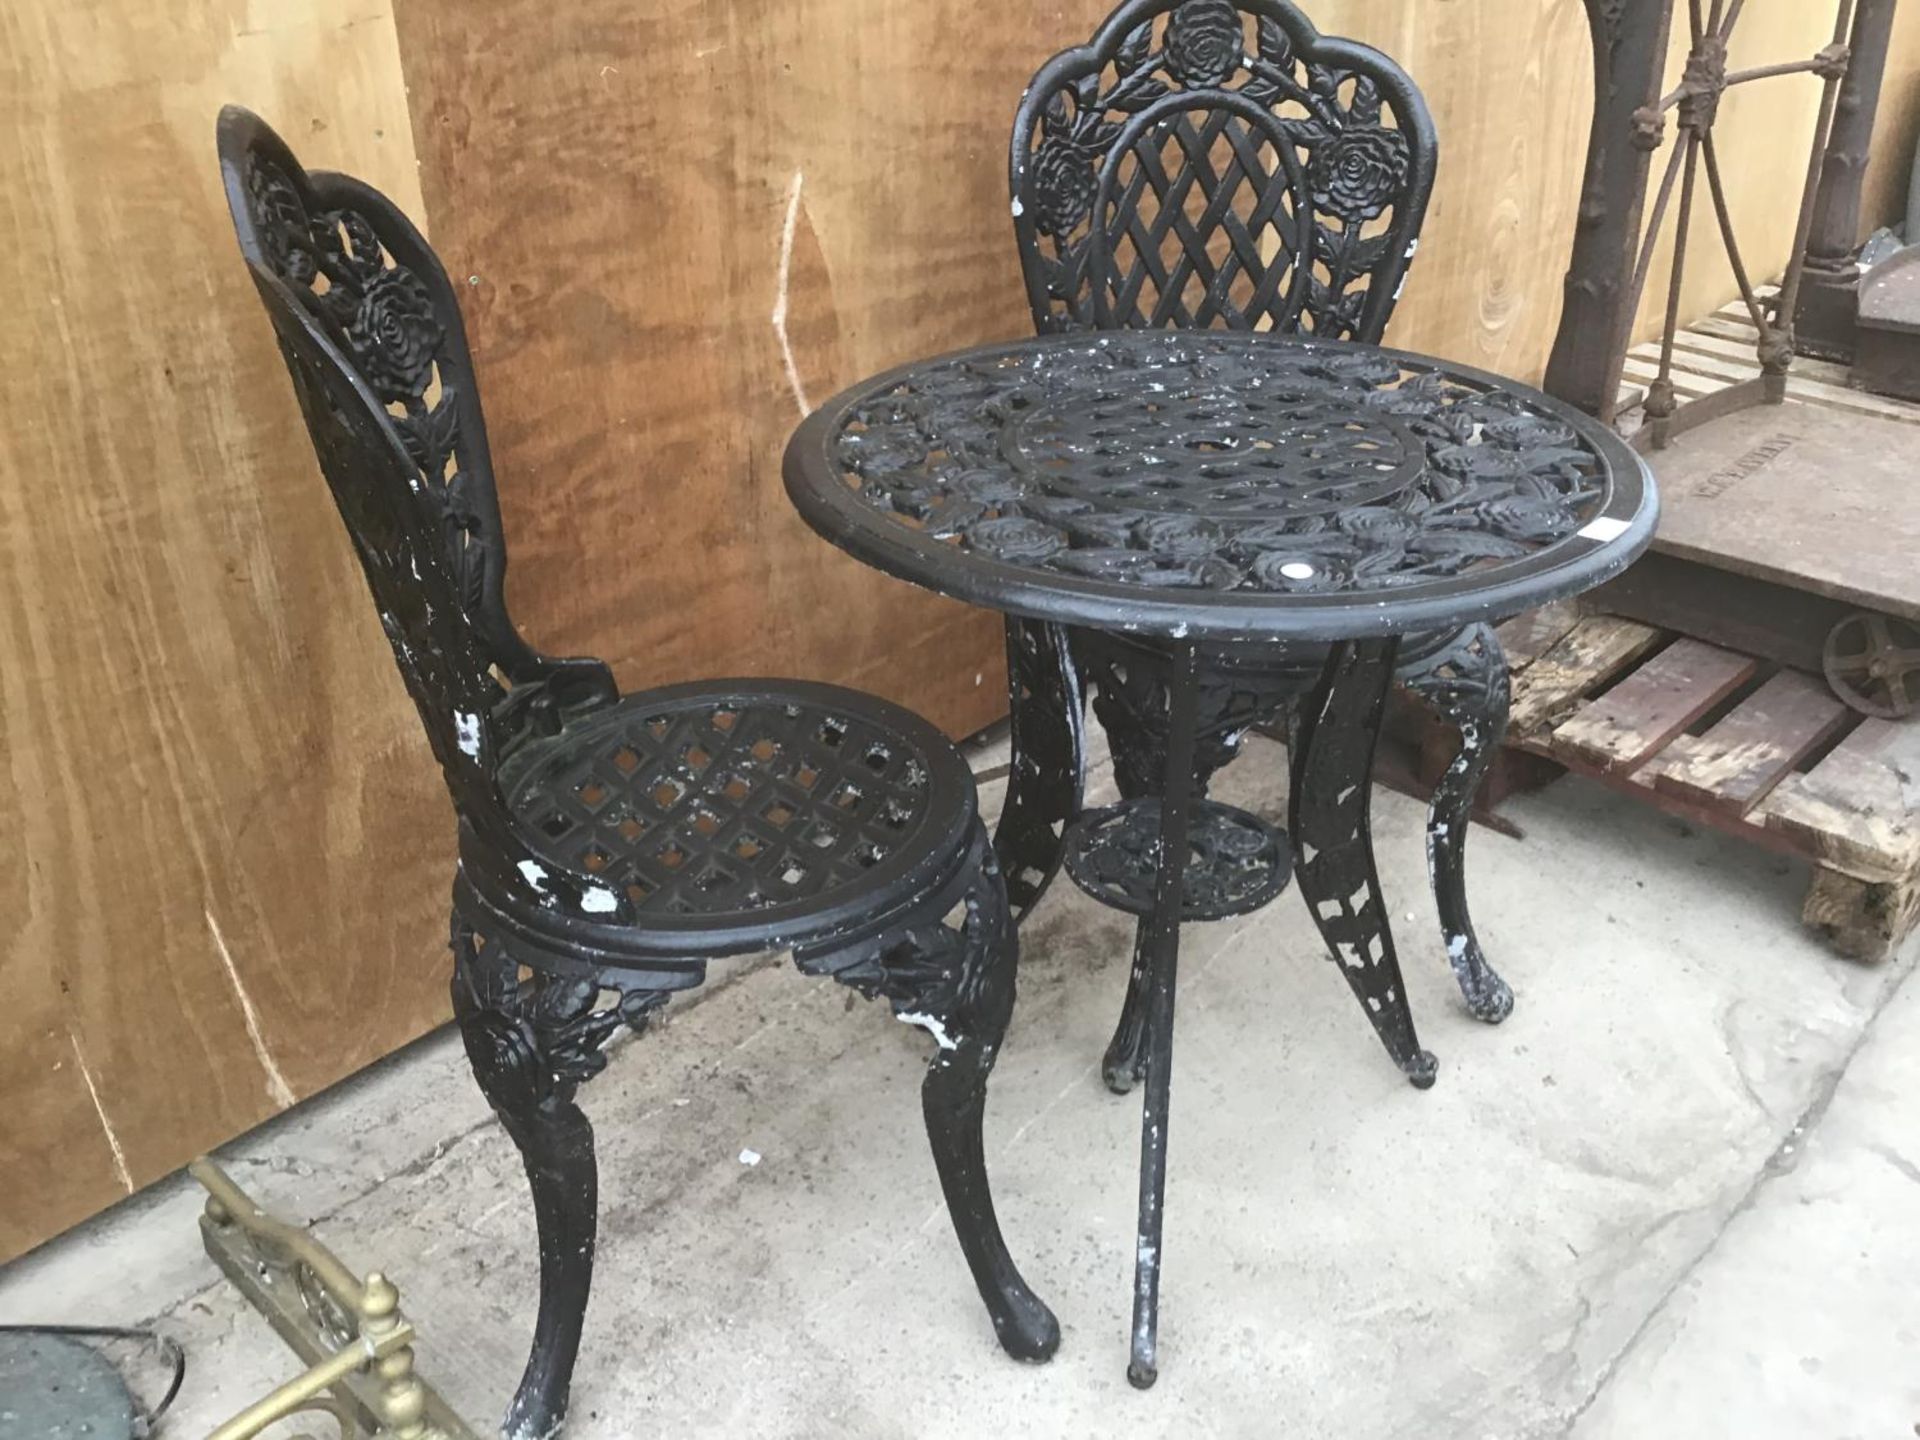 A HEAVY CAST IRON ROSE DESIGN TABLE WITH TWO MATCHING CHAIRS - Image 4 of 4